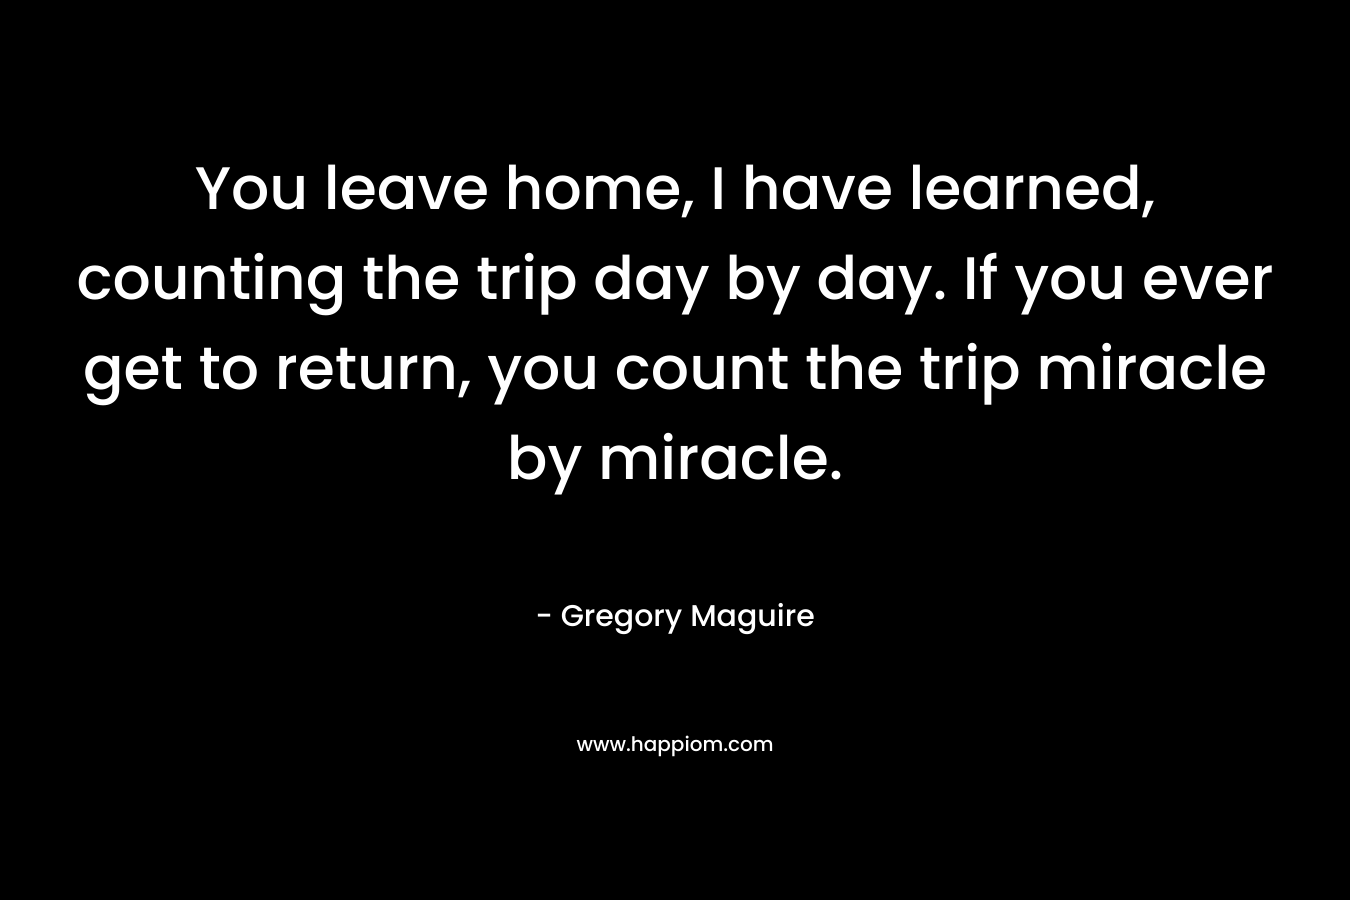 You leave home, I have learned, counting the trip day by day. If you ever get to return, you count the trip miracle by miracle.